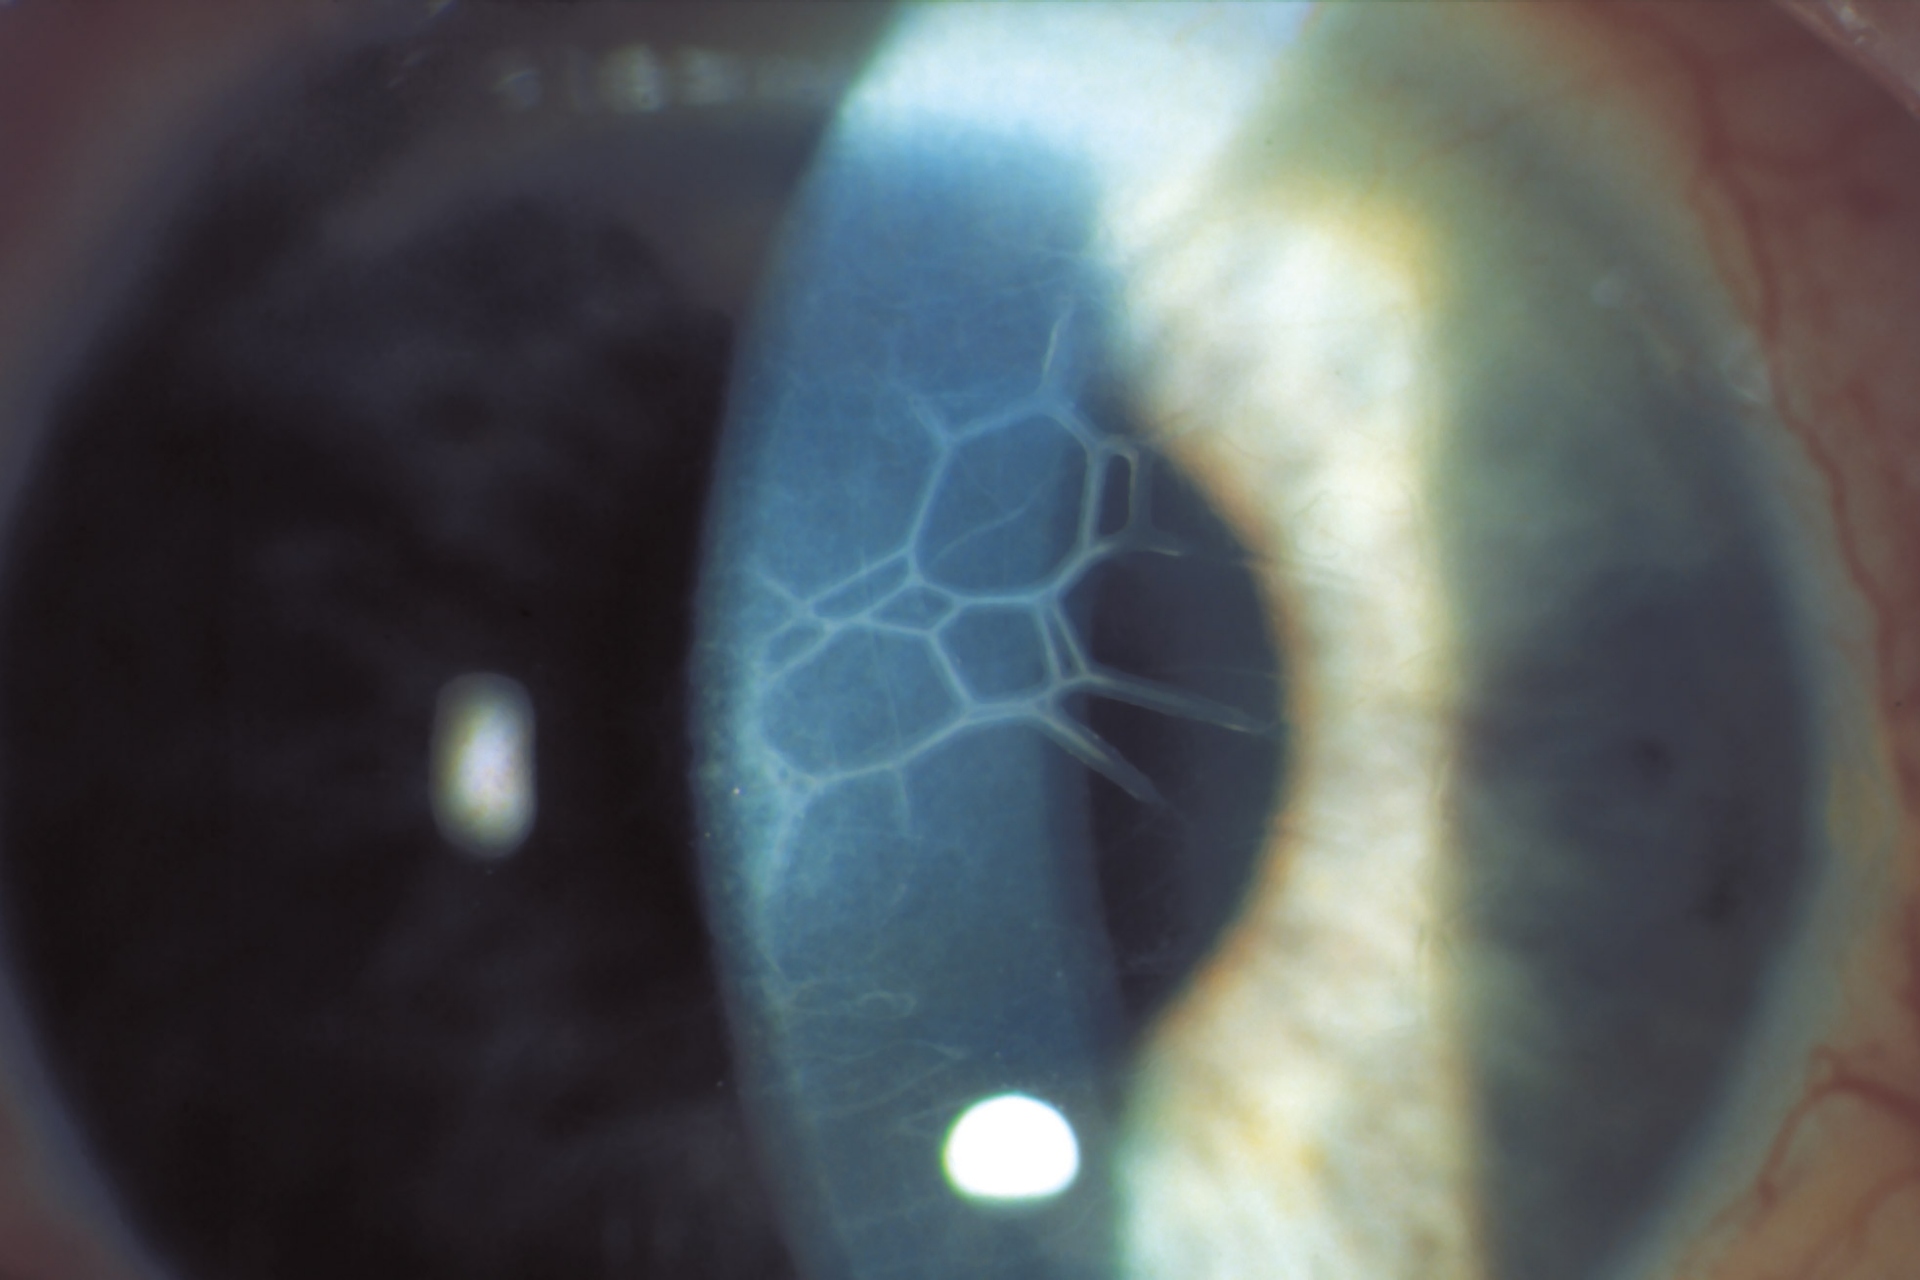 Corneal structures in direct focal illumination